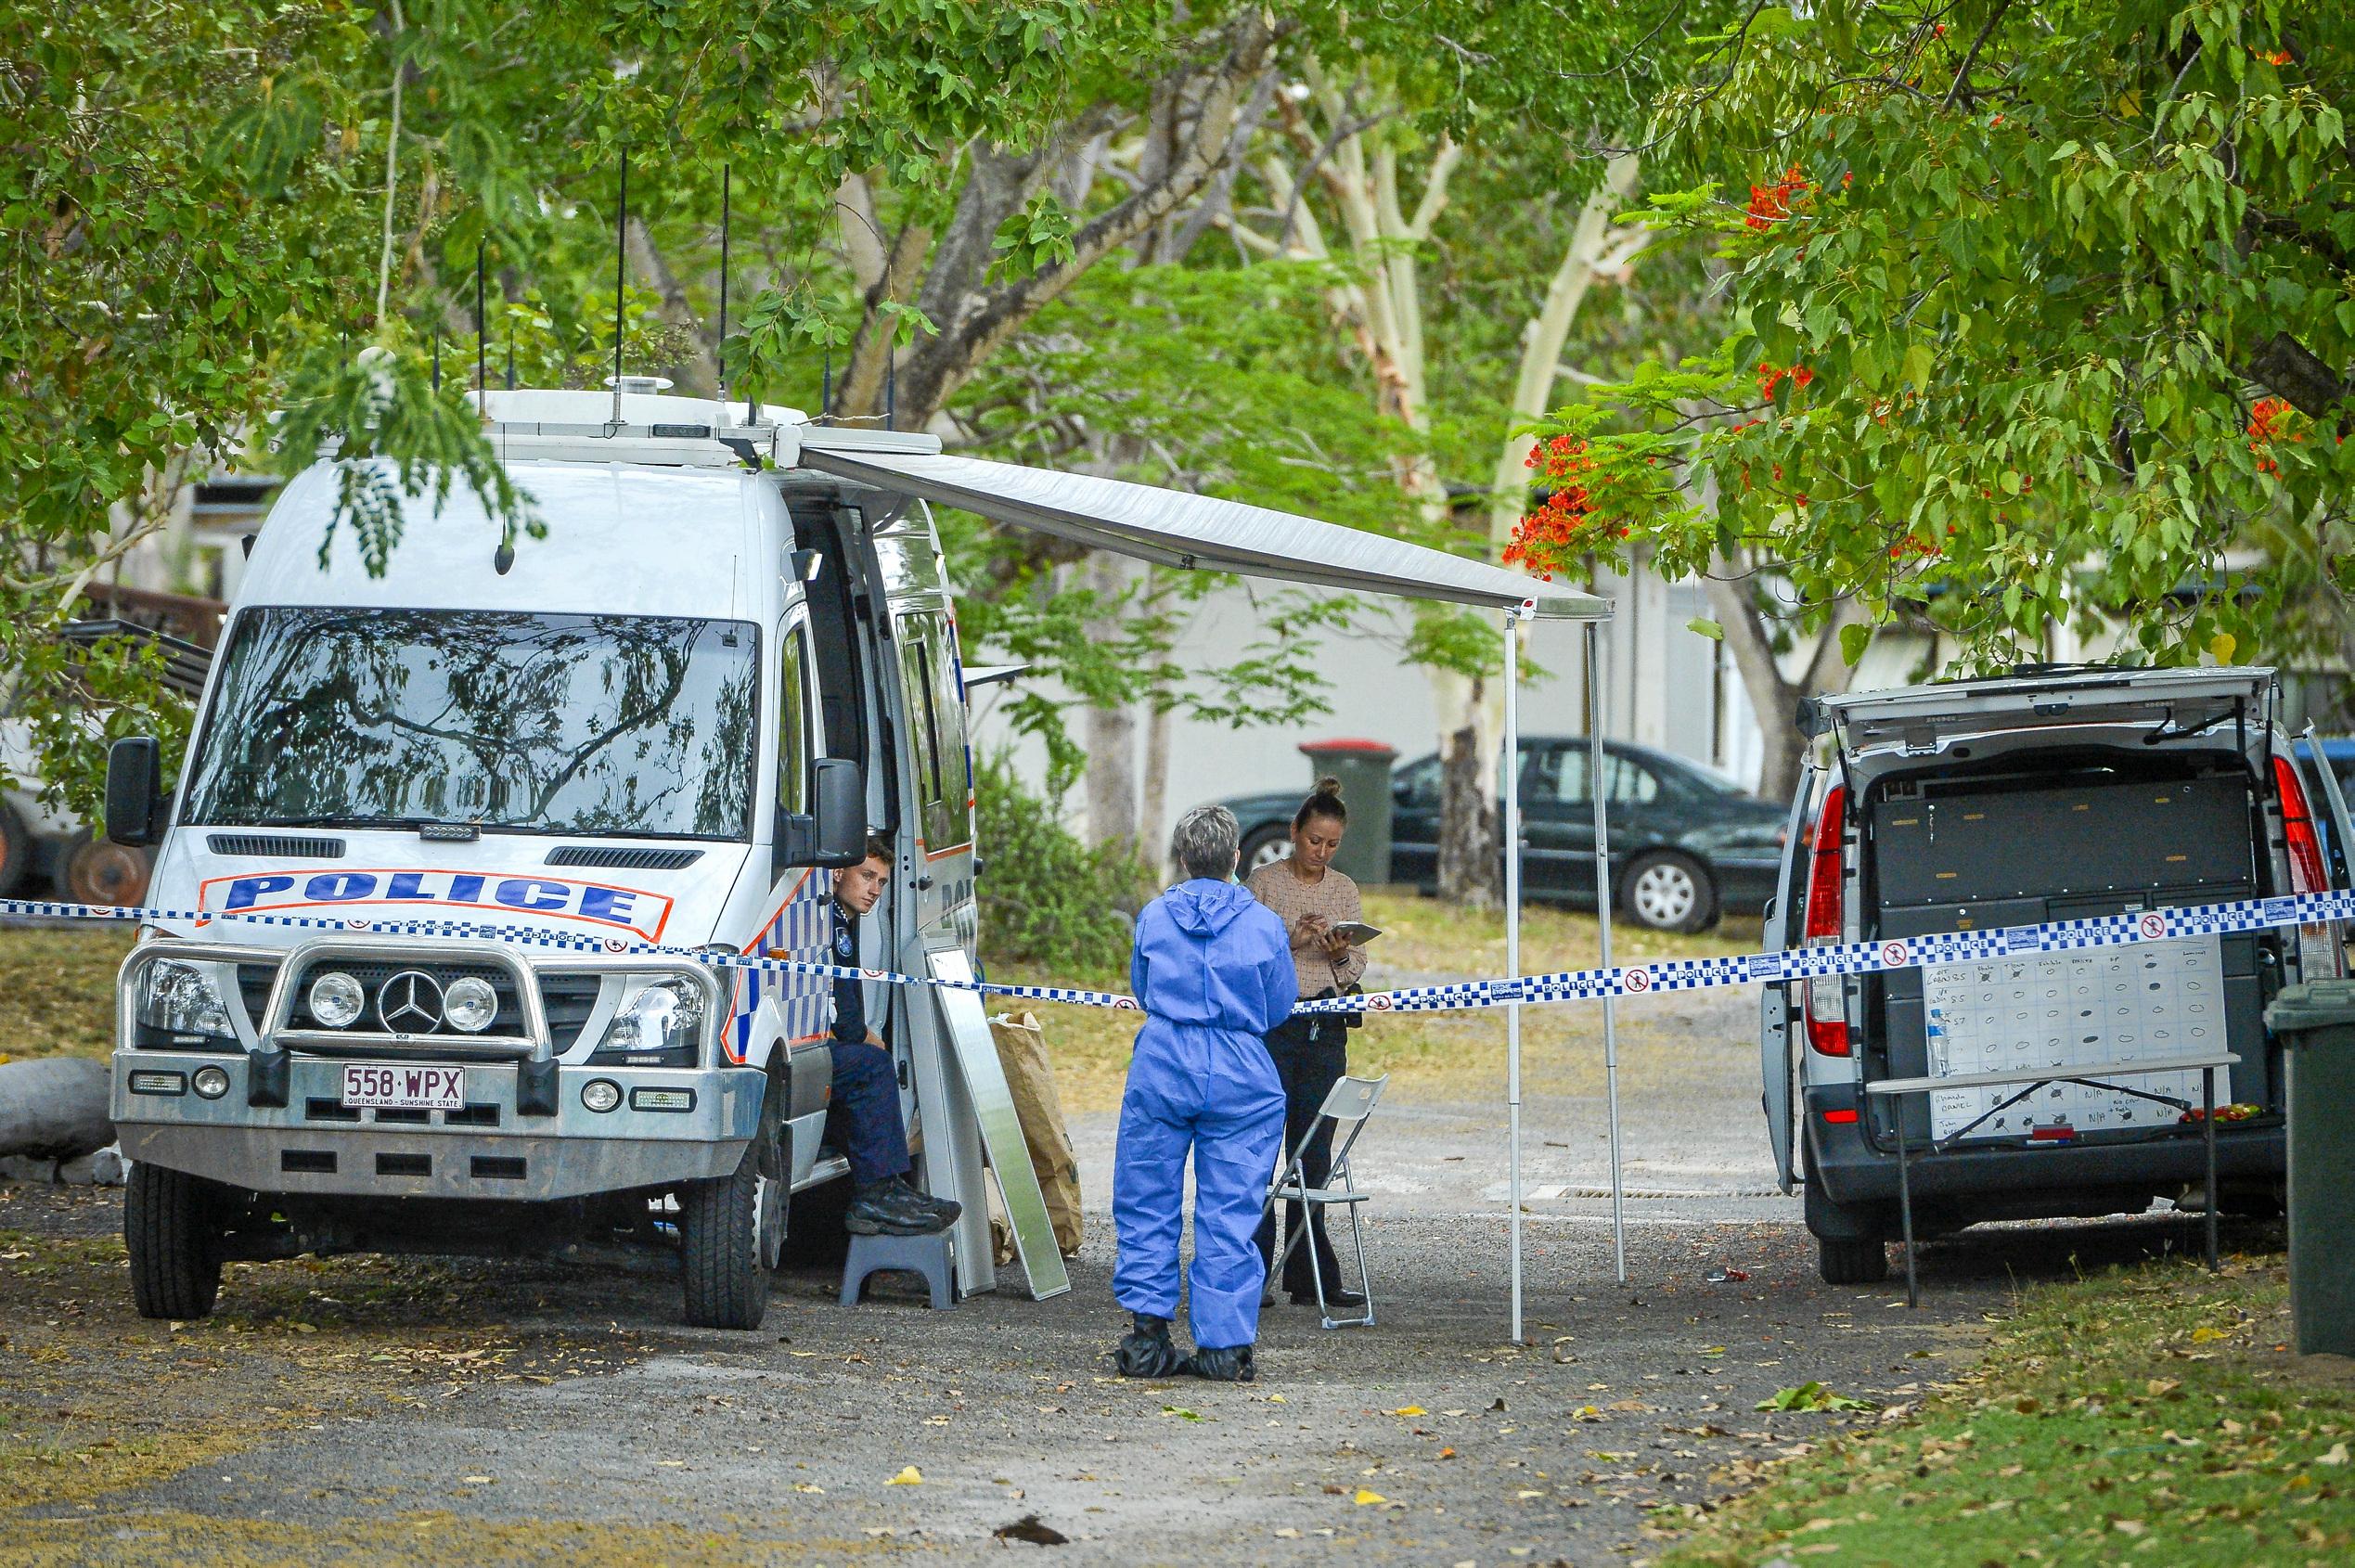 Police are investigating after an alleged double murder took place at Calliope Caravan Park, late on Thursday afternoon, 6 December 2018.